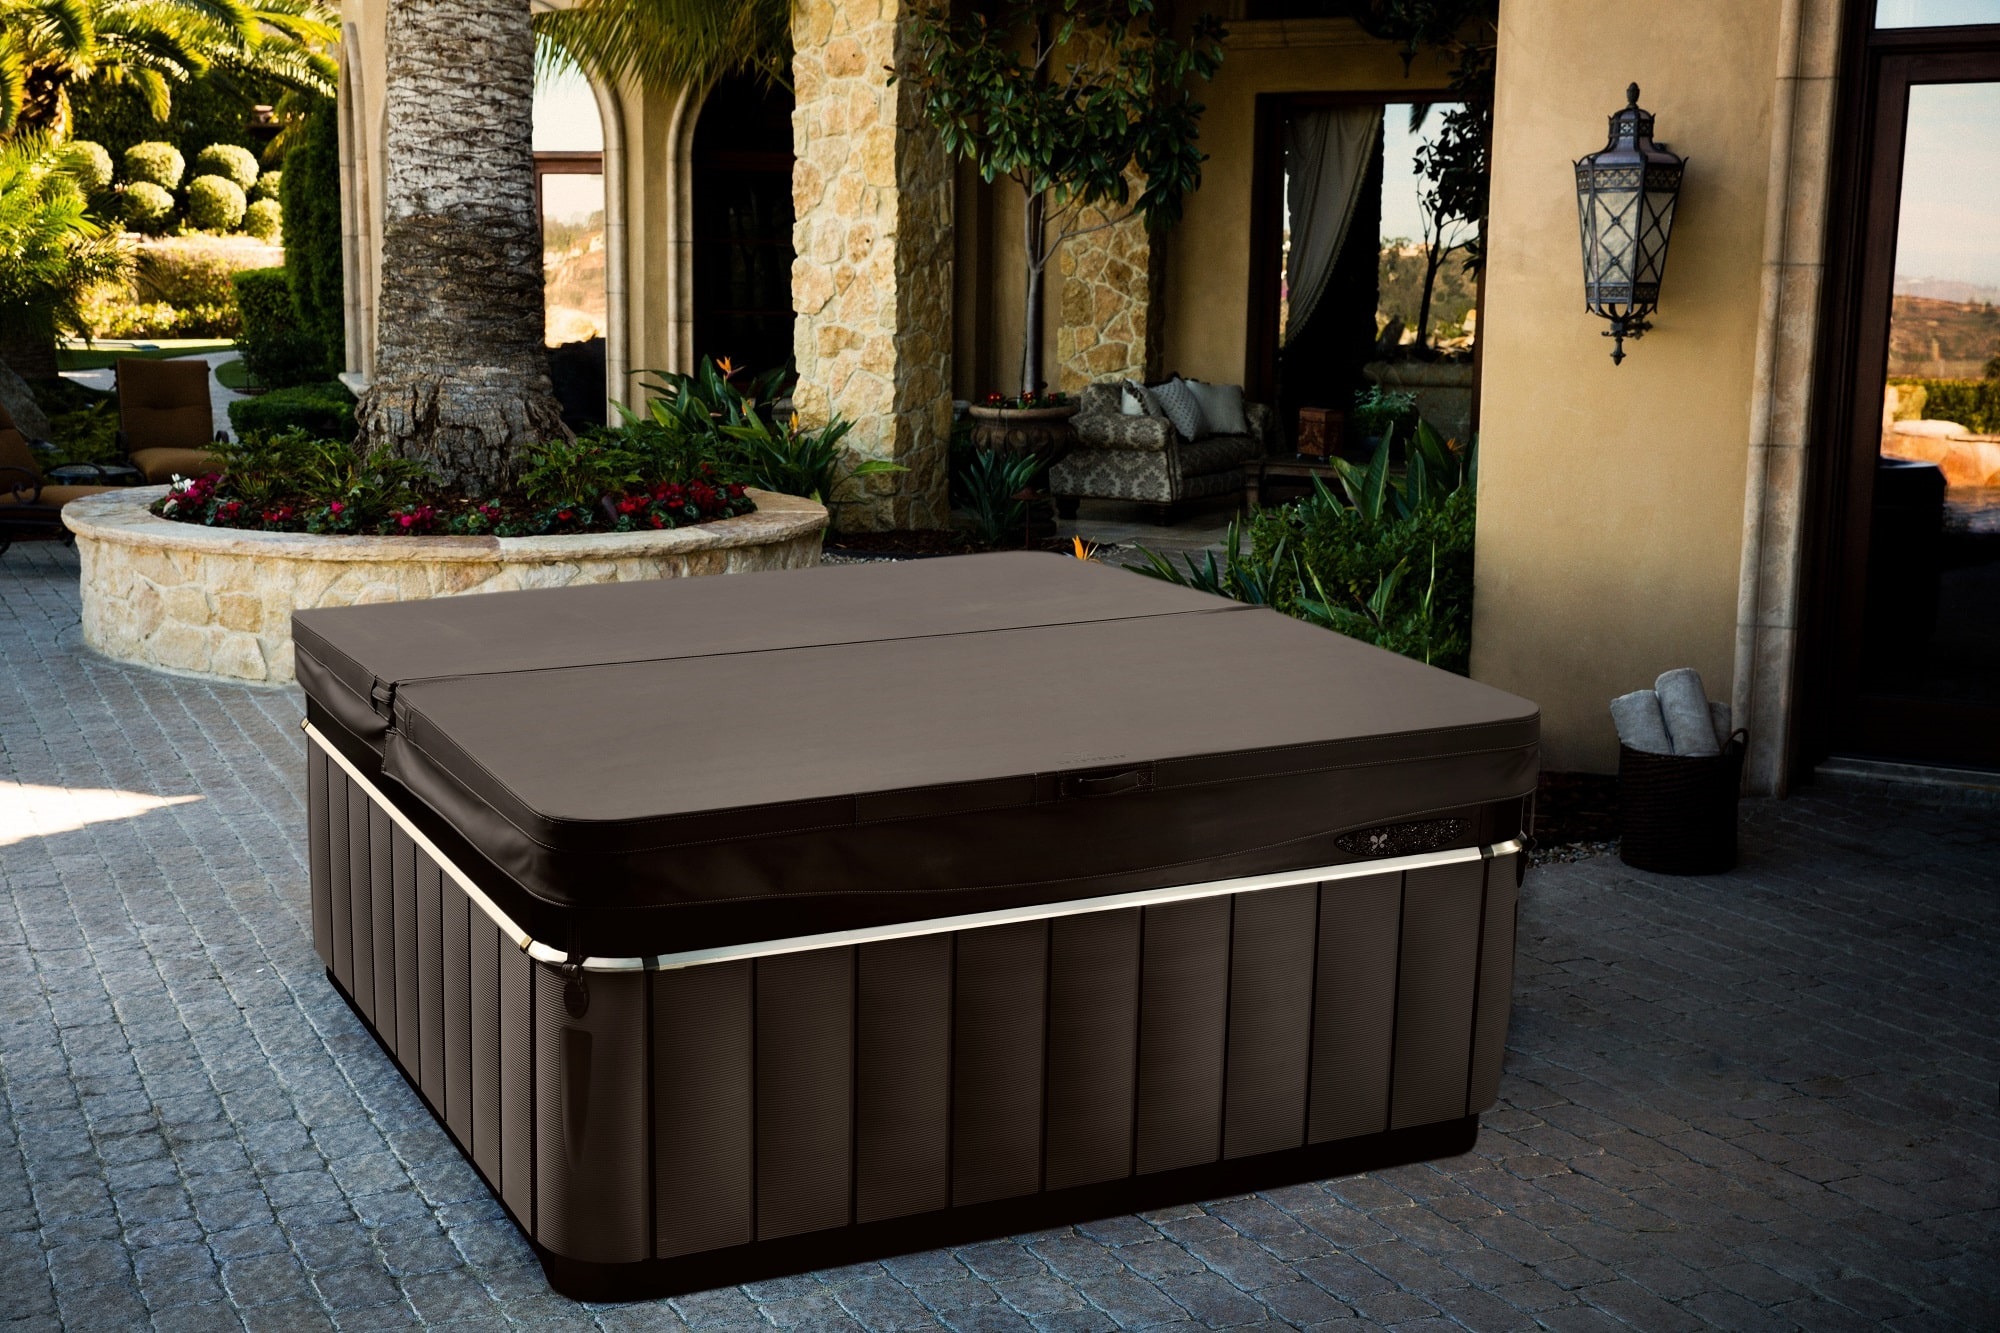 Functional and luxury hot tub accessories make your spa easy to use every day.